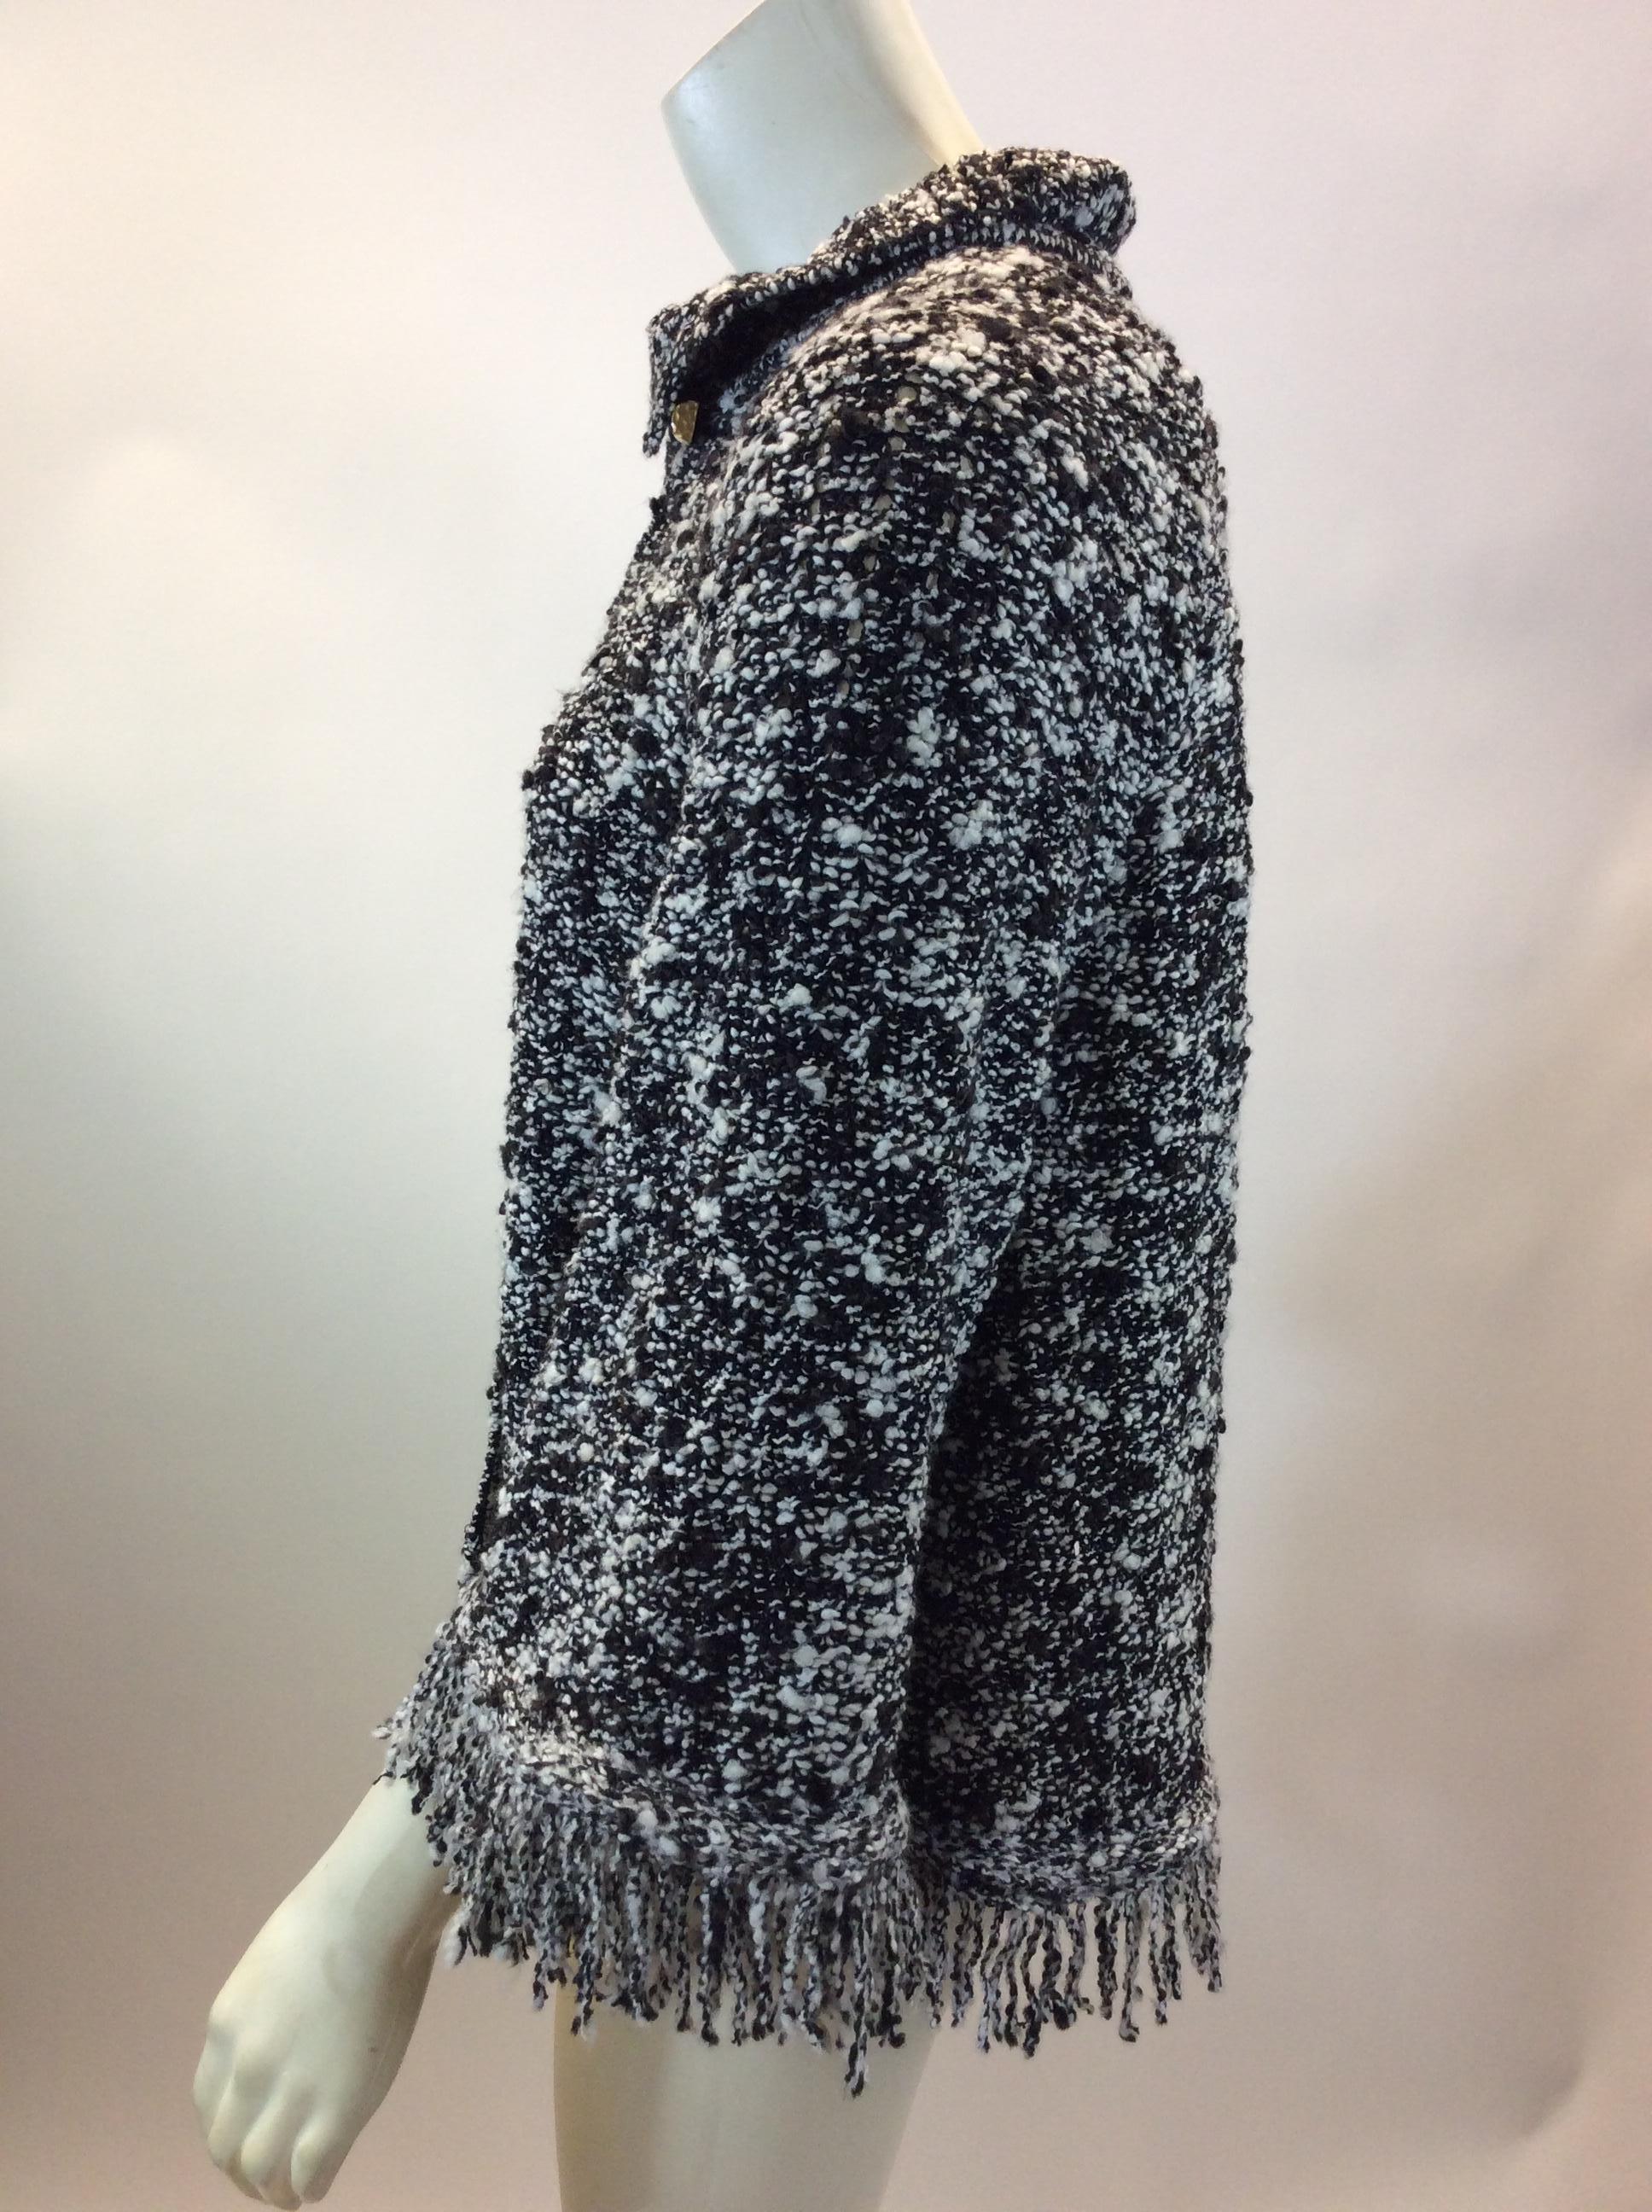 St. John Black and White Knit Sweater
$178
Made in Mexico
70% wool, 10% rayon, 5% nylon, 15% acetate
Size Large
Length 21